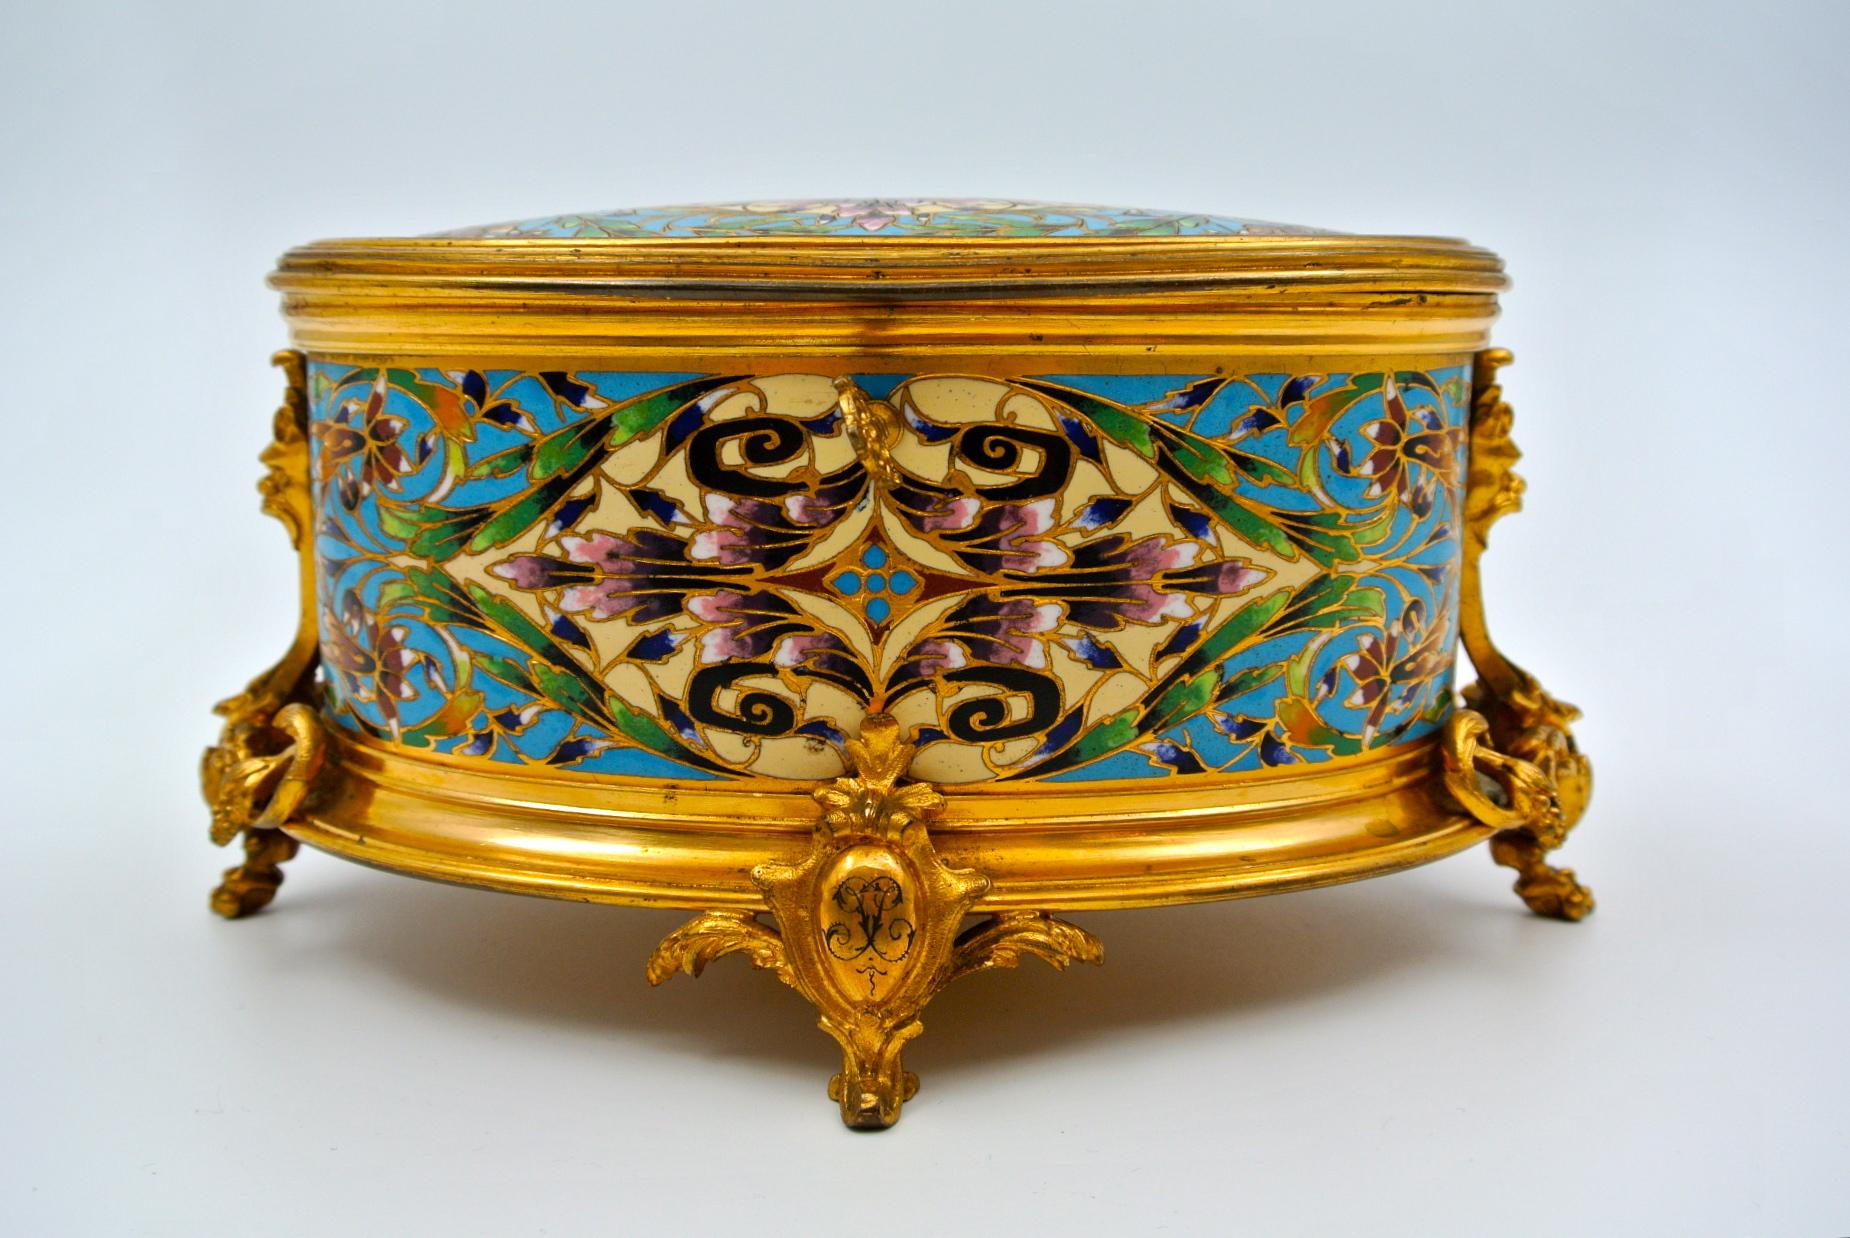 Very beautiful box in gilt and chiselled bronze, gilt and enameled with its original key, velvet Interior, 19th century Napoleon III
Measures: H 11cm, W 22cm, D 15cm.